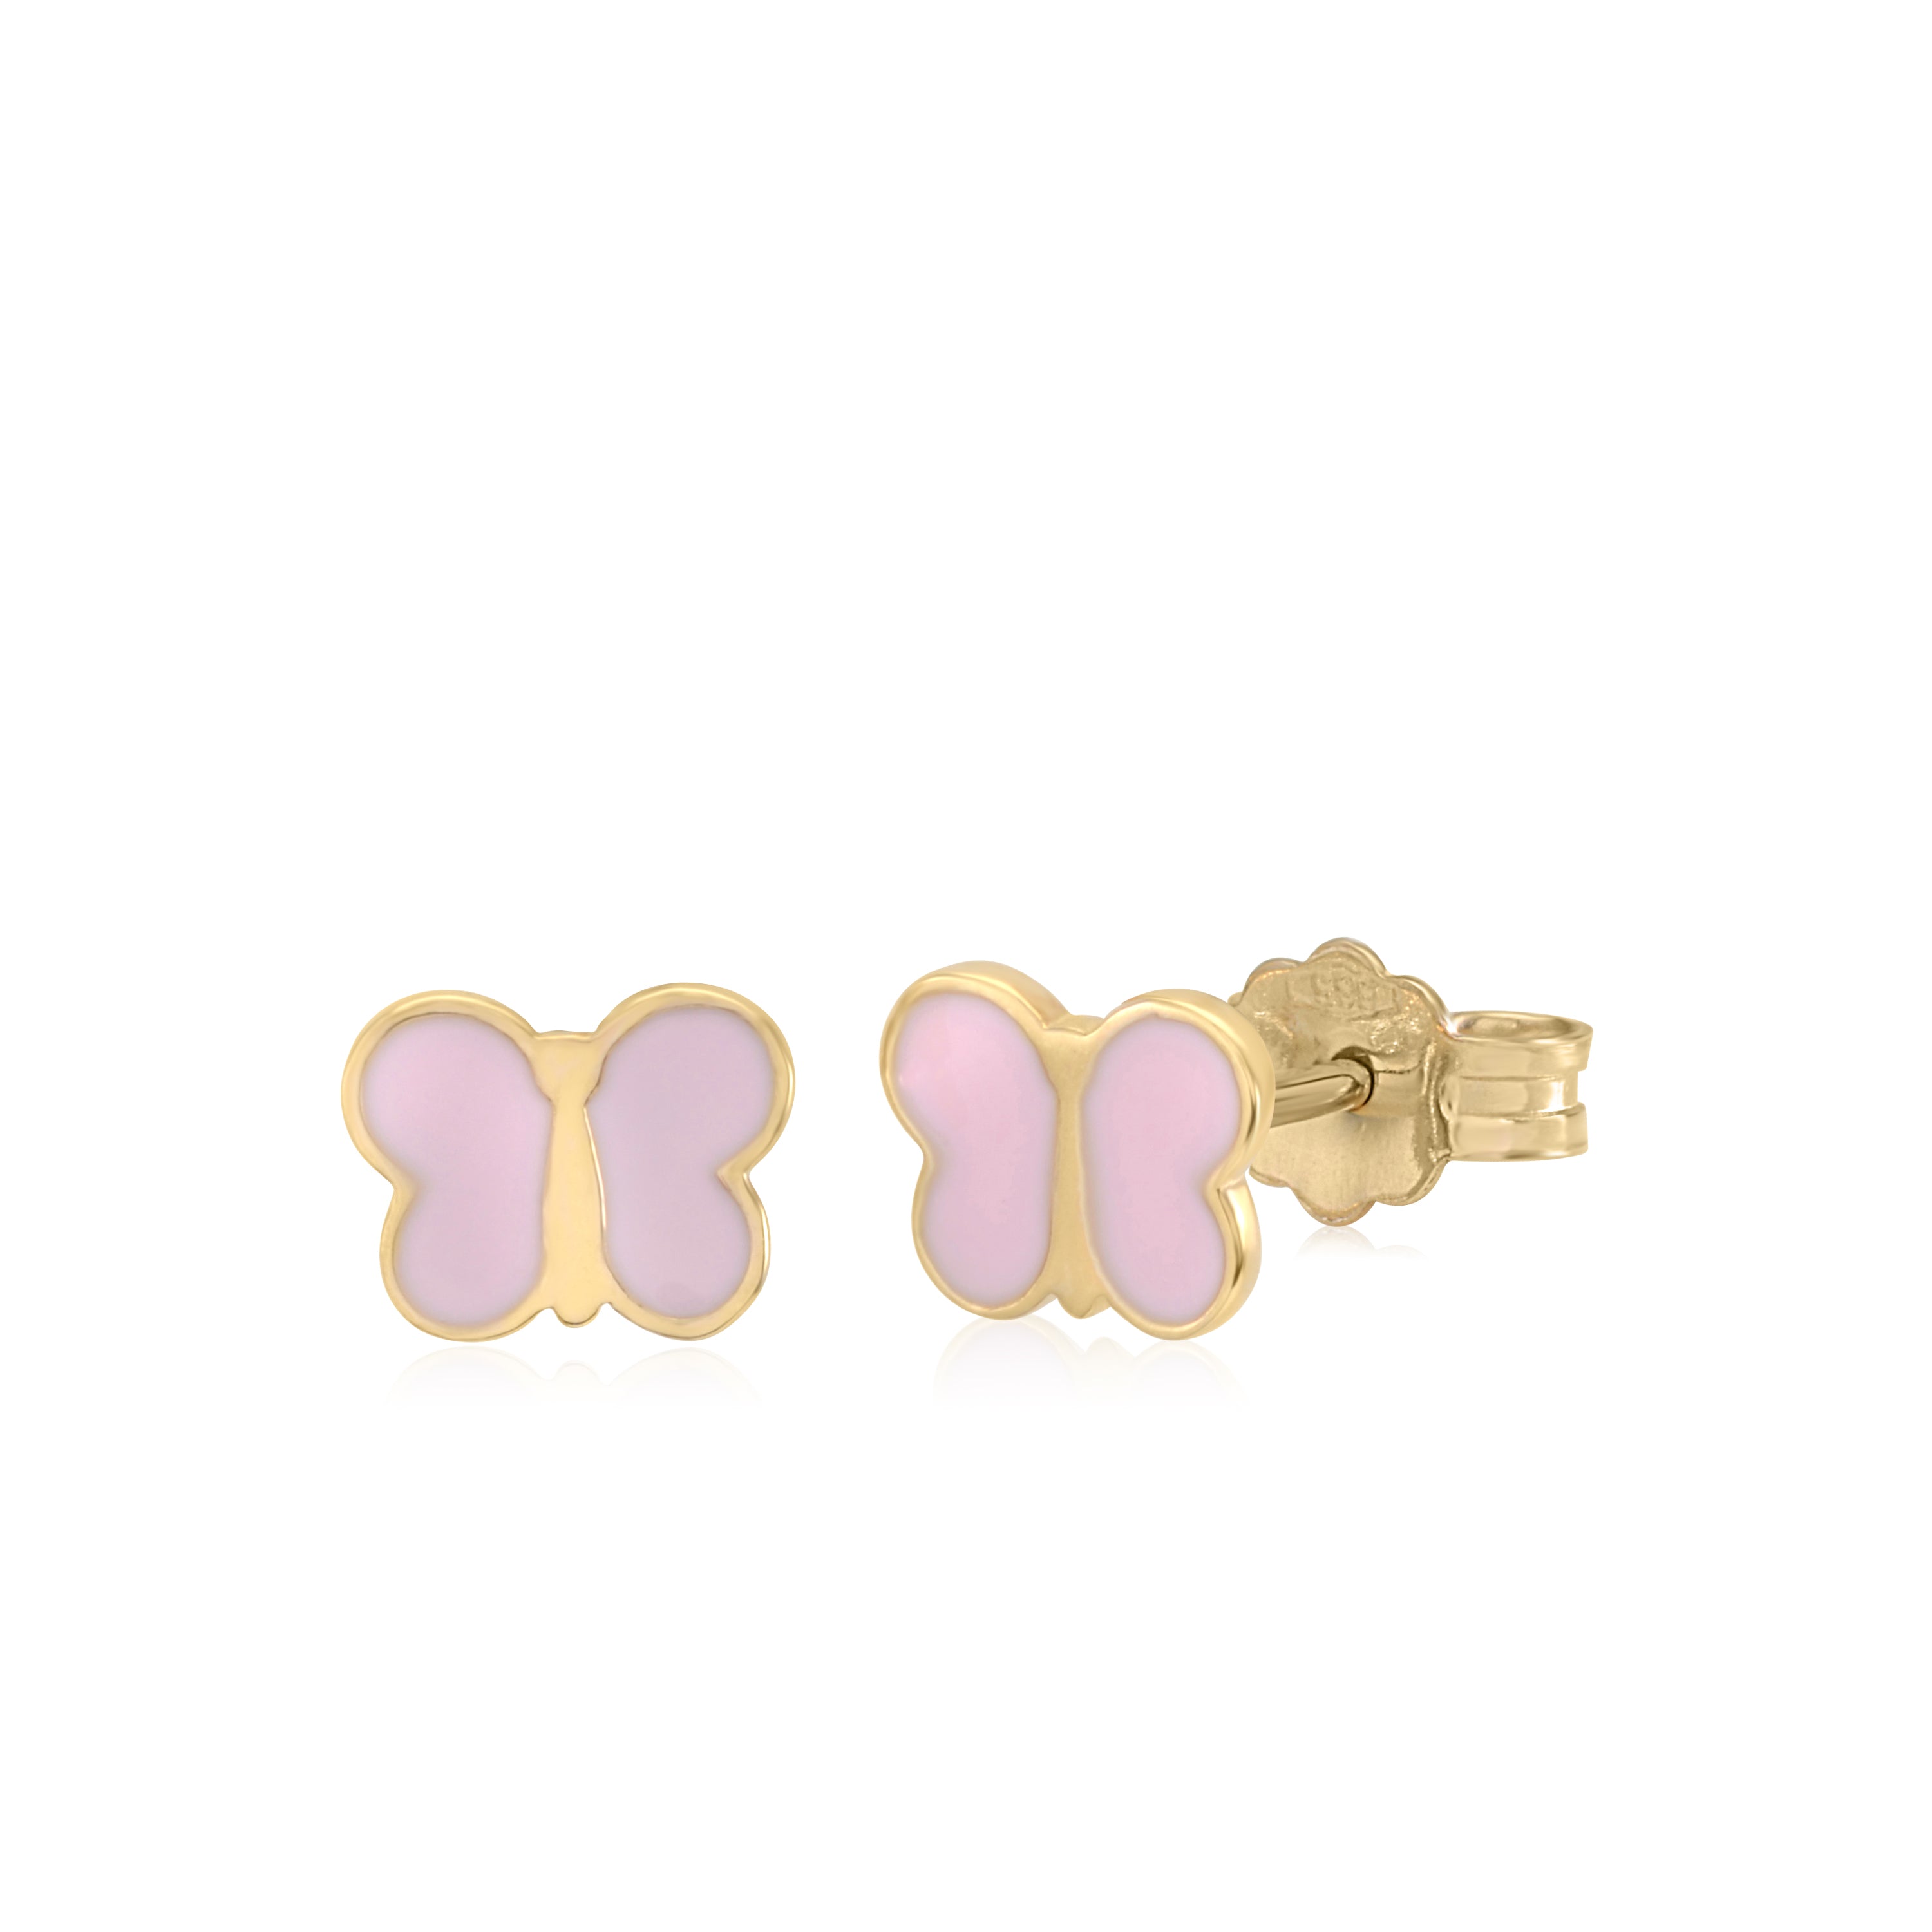 UNICORNJ 14K Yellow Gold Childrens Cute Post Stud Earrings with Enamel Italy